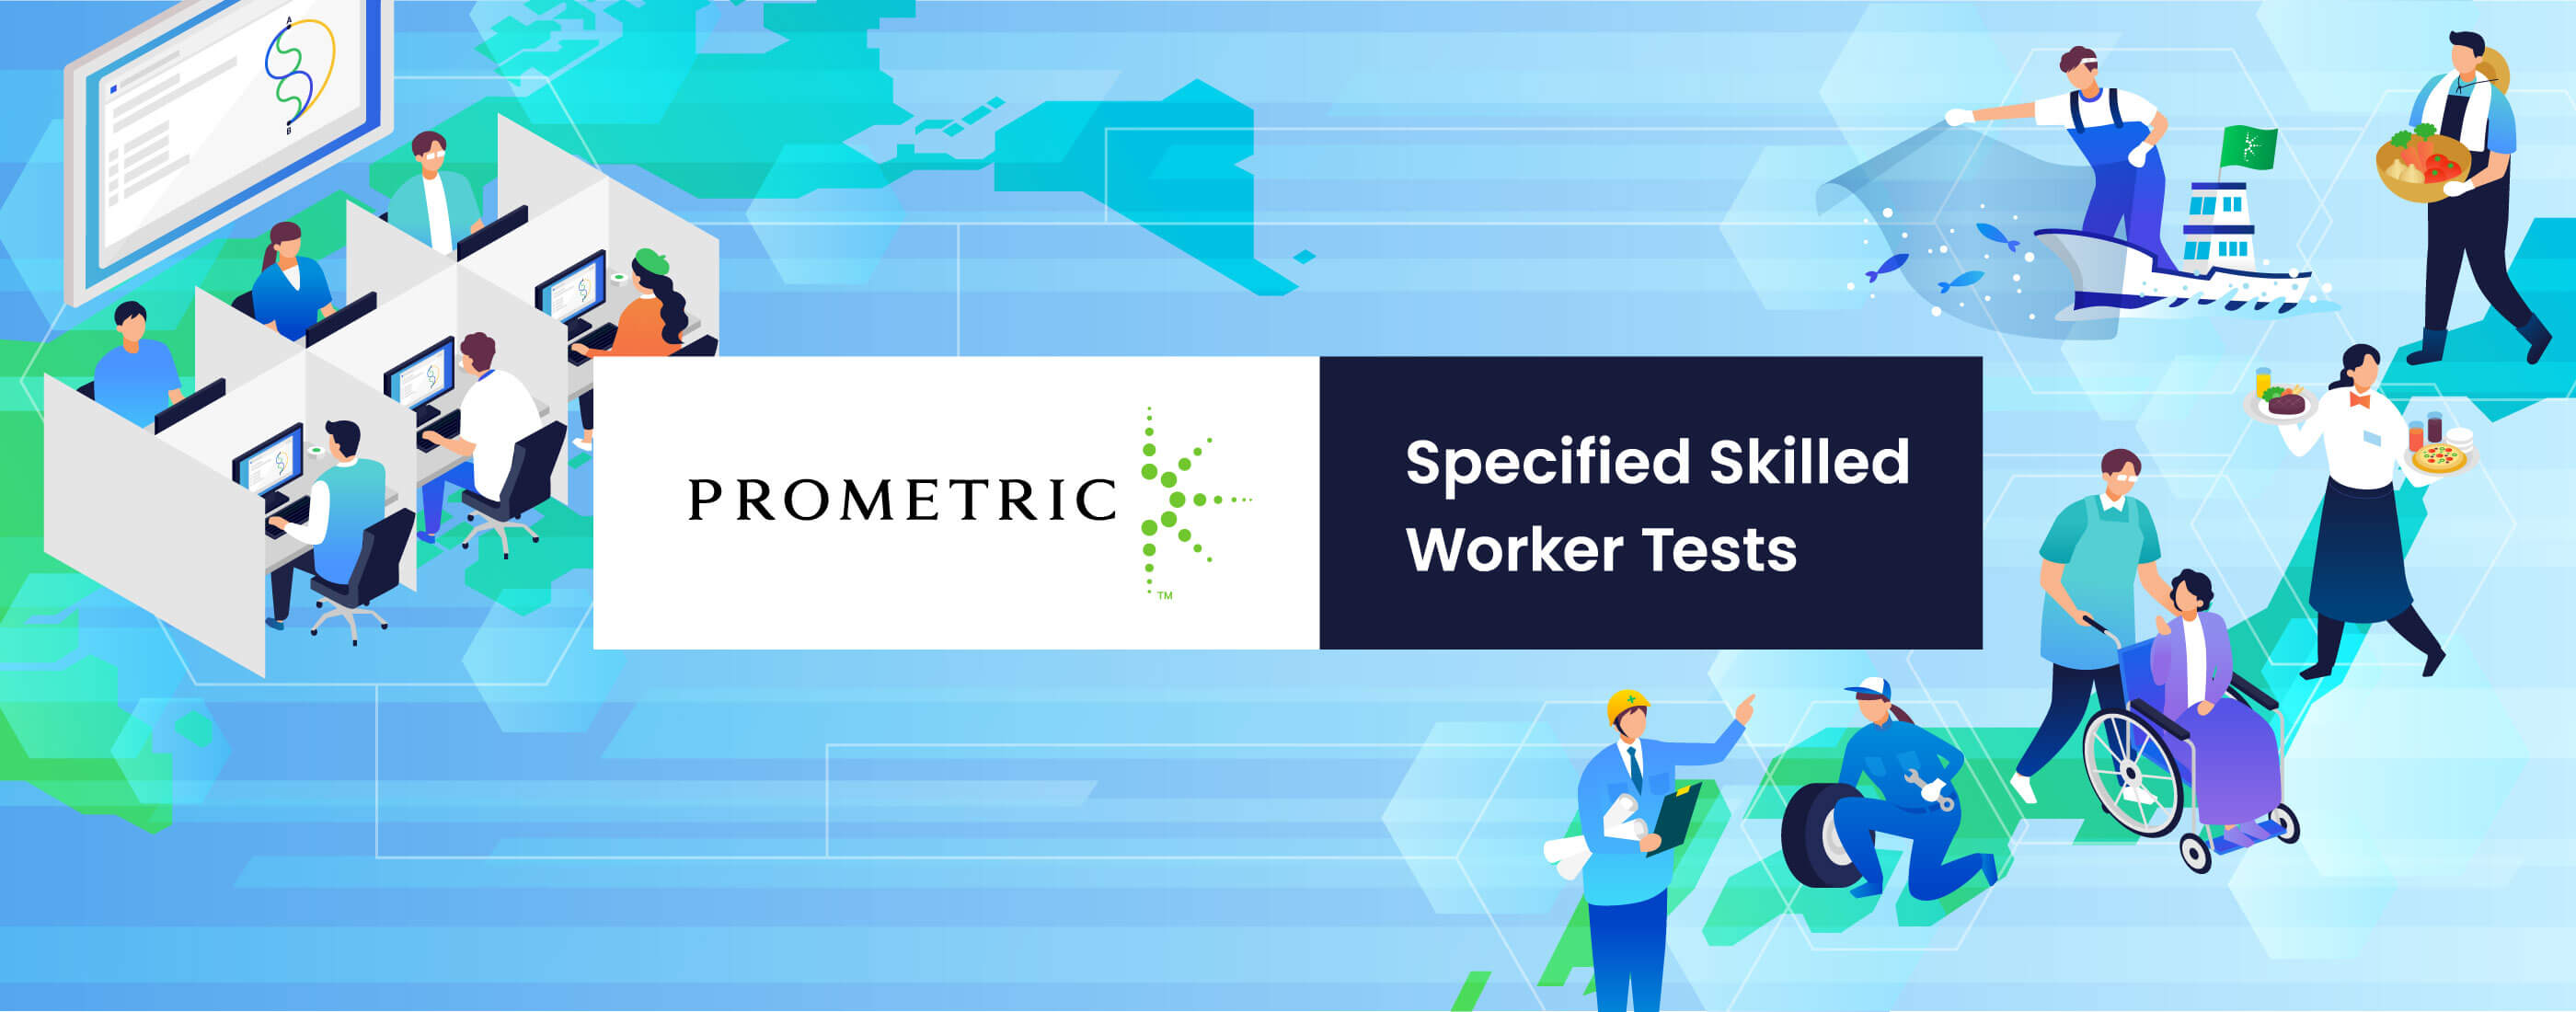 PROMETRIC Specified Skilled Worker Tests